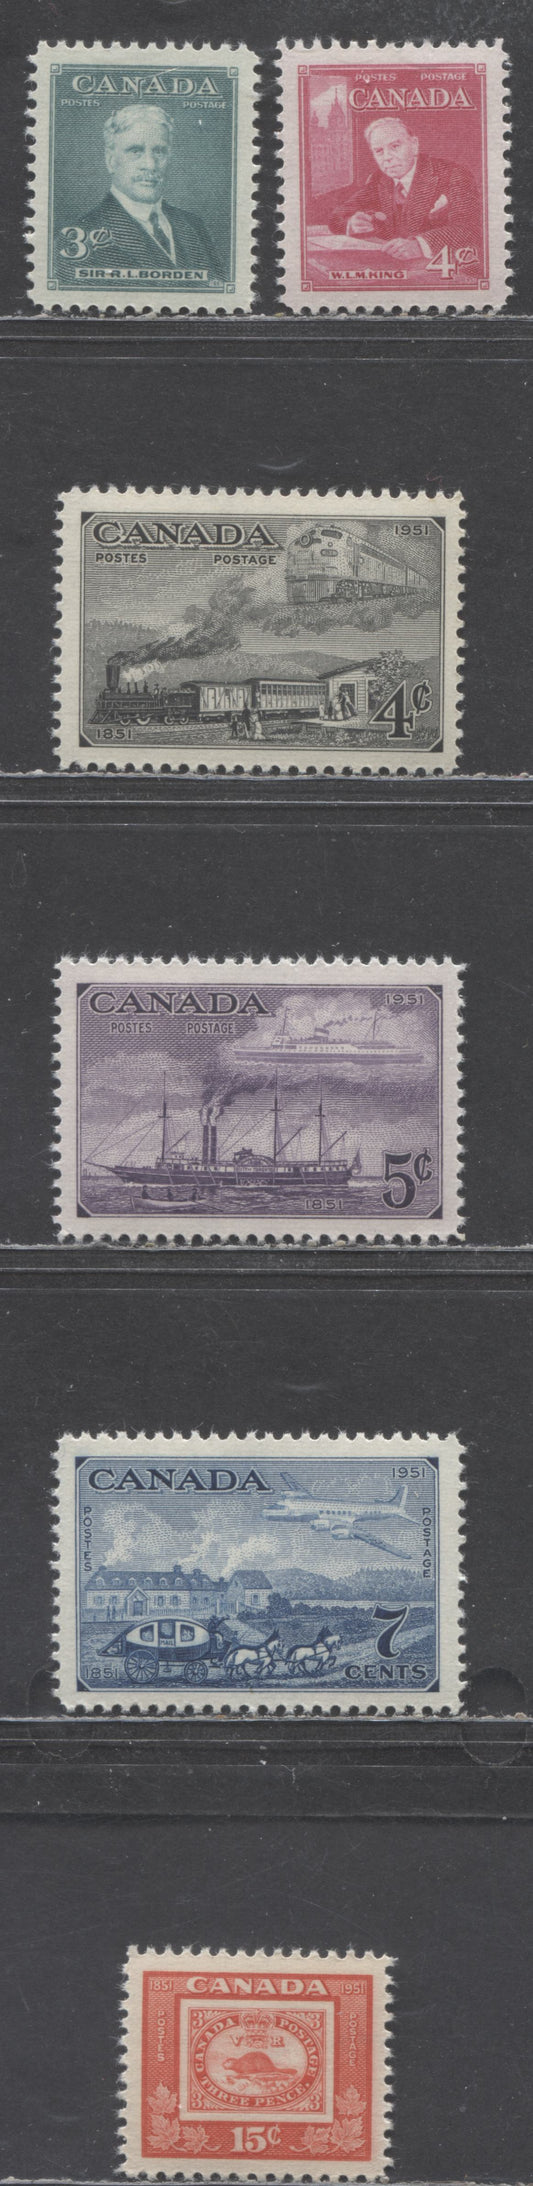 Lot 394 Canada #303-304, 311-314 3c, 4c, 5c, 7c, 15c Various Colours Various Subjects, 1951 Prime Ministers Issue & CAPEX '51 , 6 VFNH Singles,Smooth & Horizontally Ribbed Papers, Cream Gloss & Semi-Gloss Gum All Selected For Centering